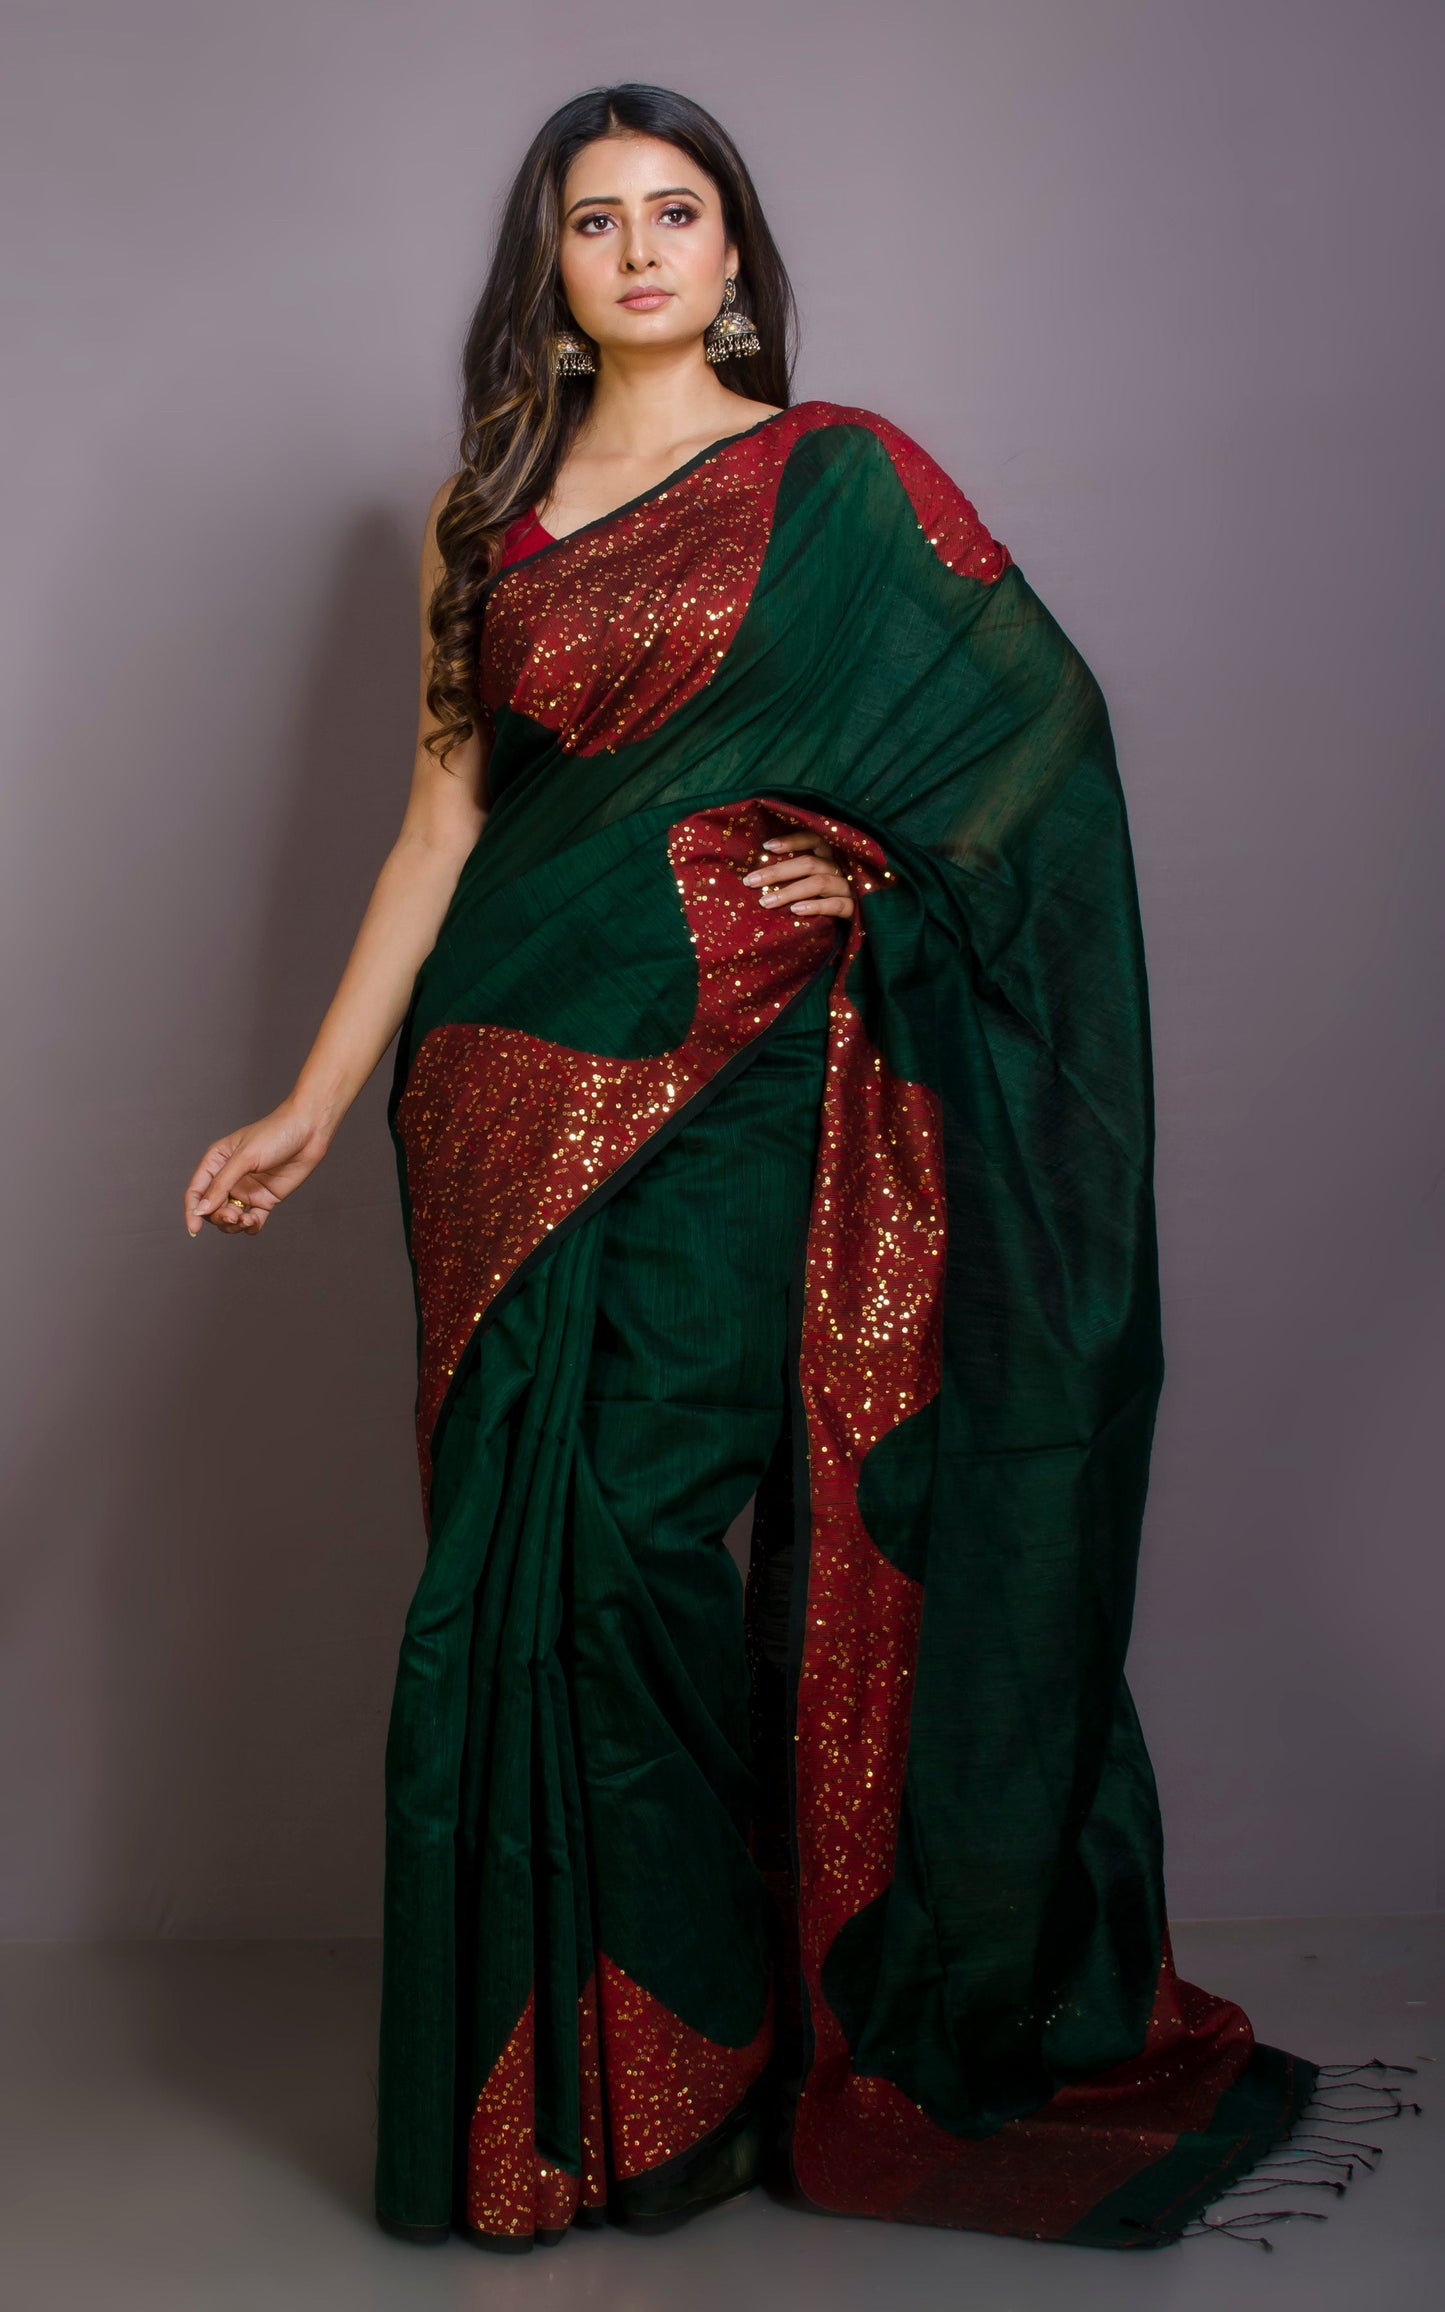 Woven Gold Studded Sequin Work Tussar Matka Silk Saree in Dark Green and Red